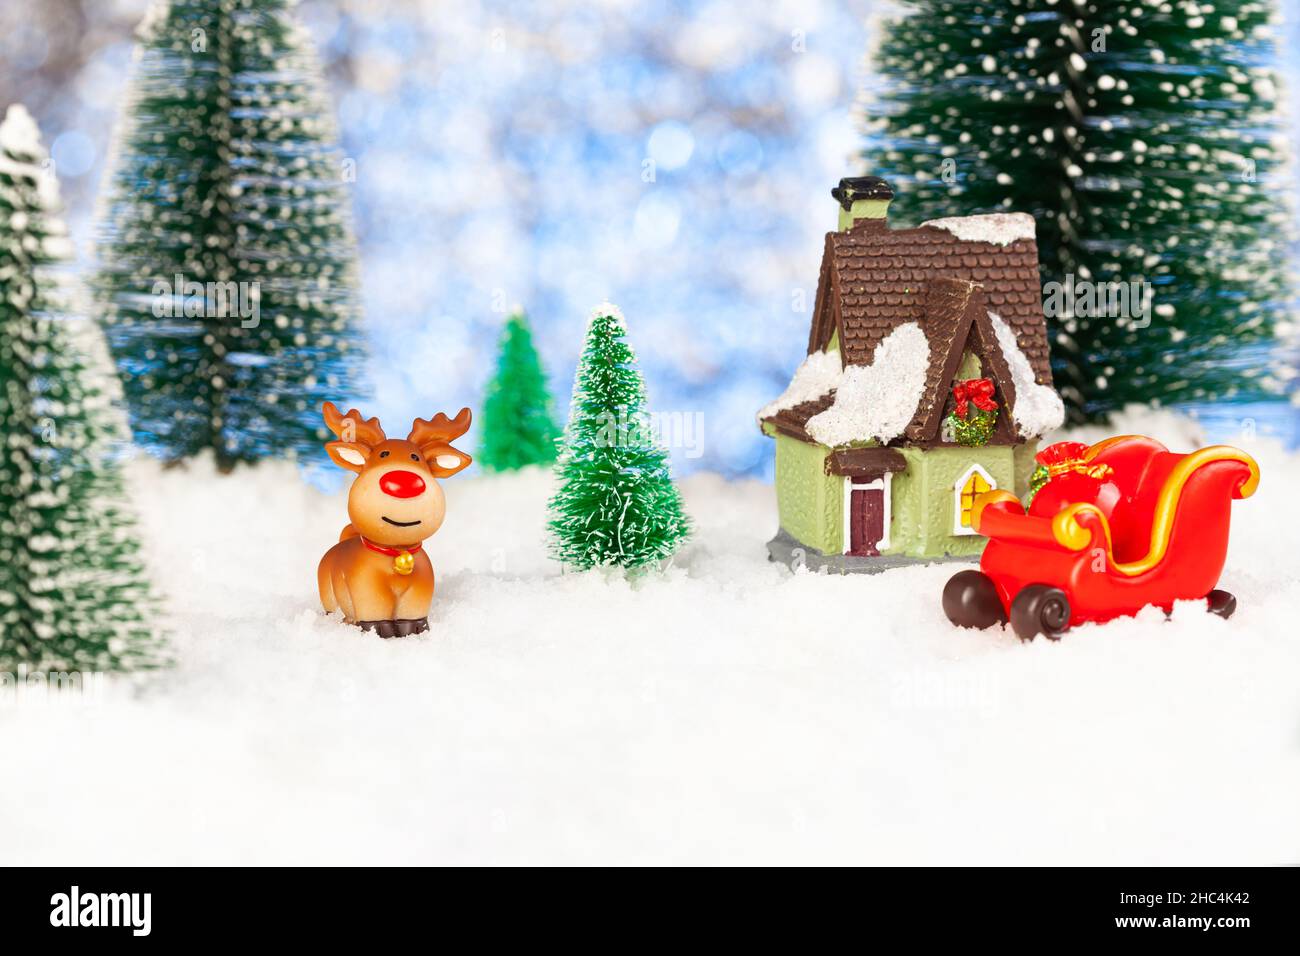 toy sleigh and toy reindeer in the snow near a small house Stock Photo